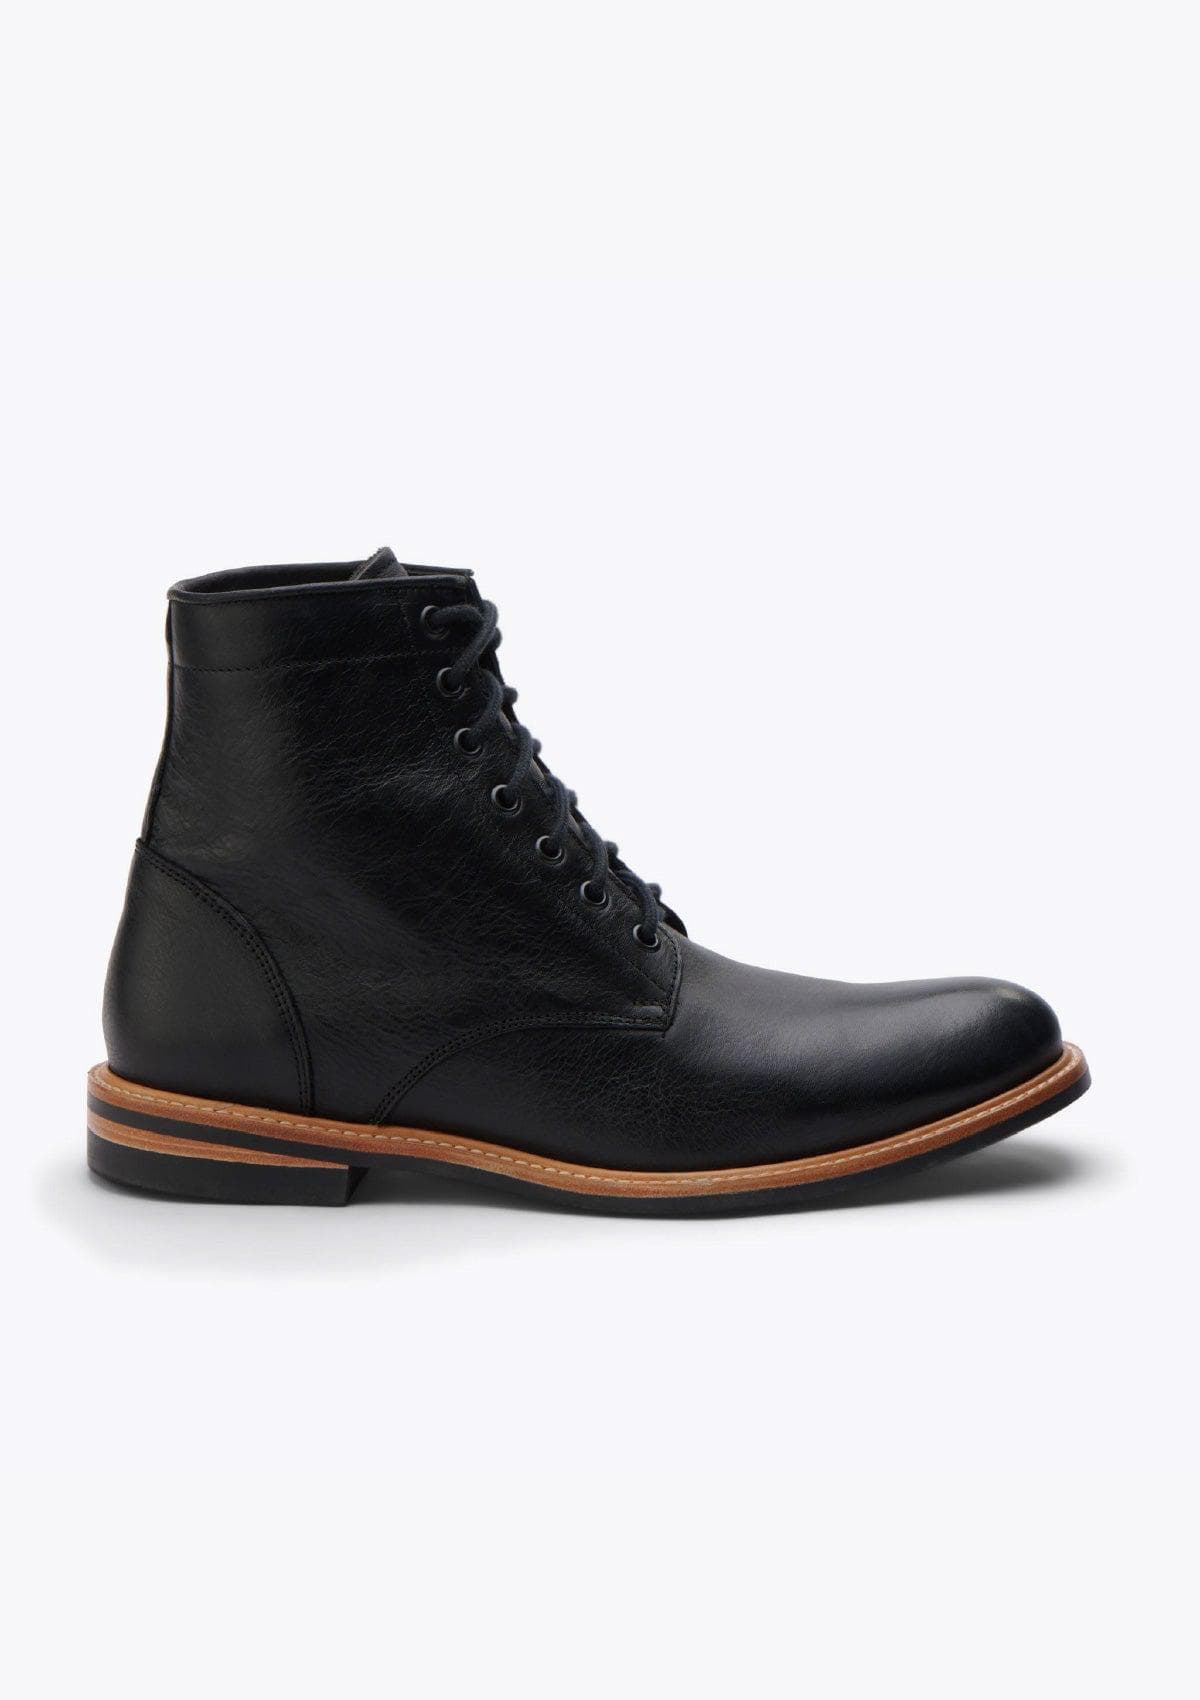 All-Weather Andres Boots - Black